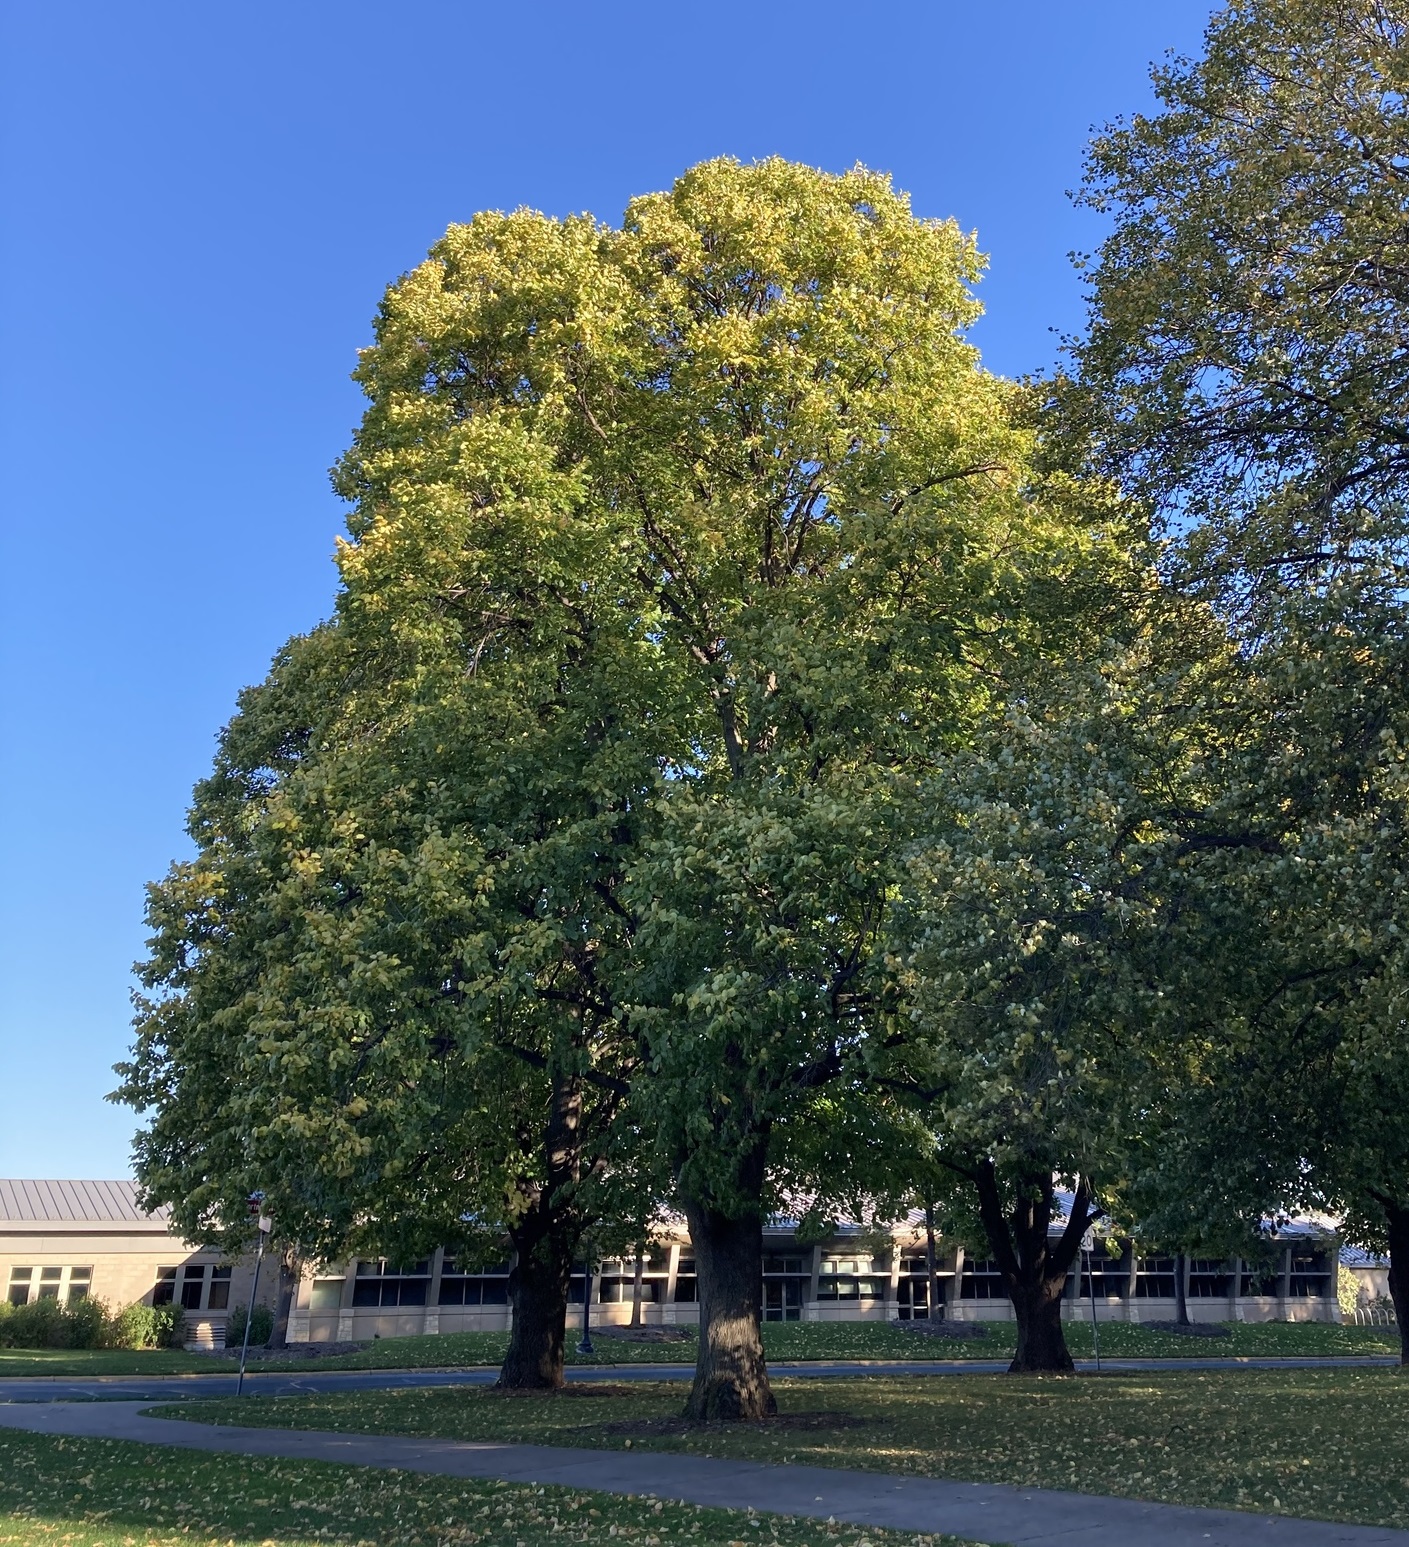 American basswood tree in a landscaped setting against bright blue sky.